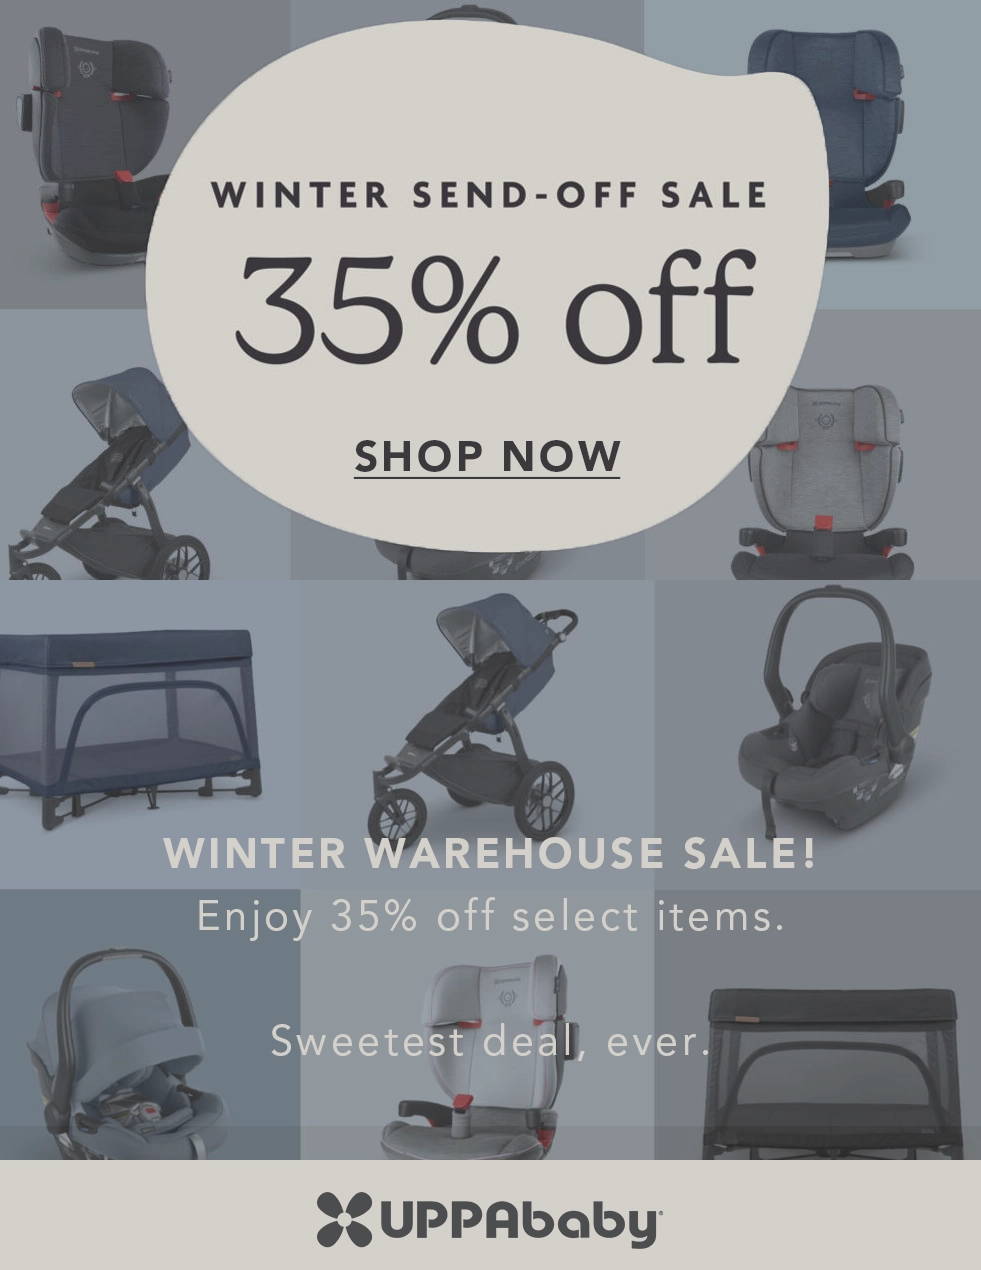 UPPABaby Winter Sale Warehouse sale up to 35% off